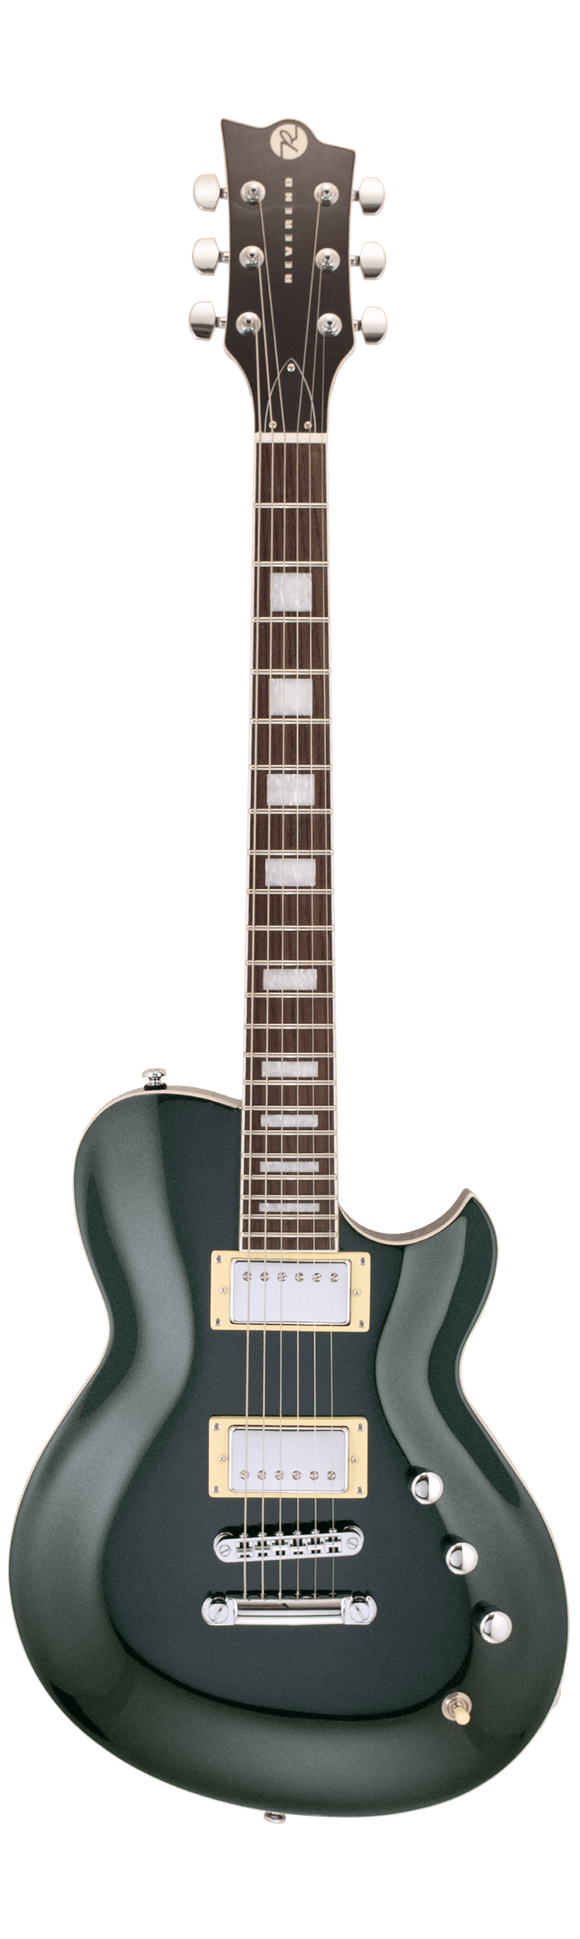 Reverend Guitars Roundhouse, Outfield Ivy